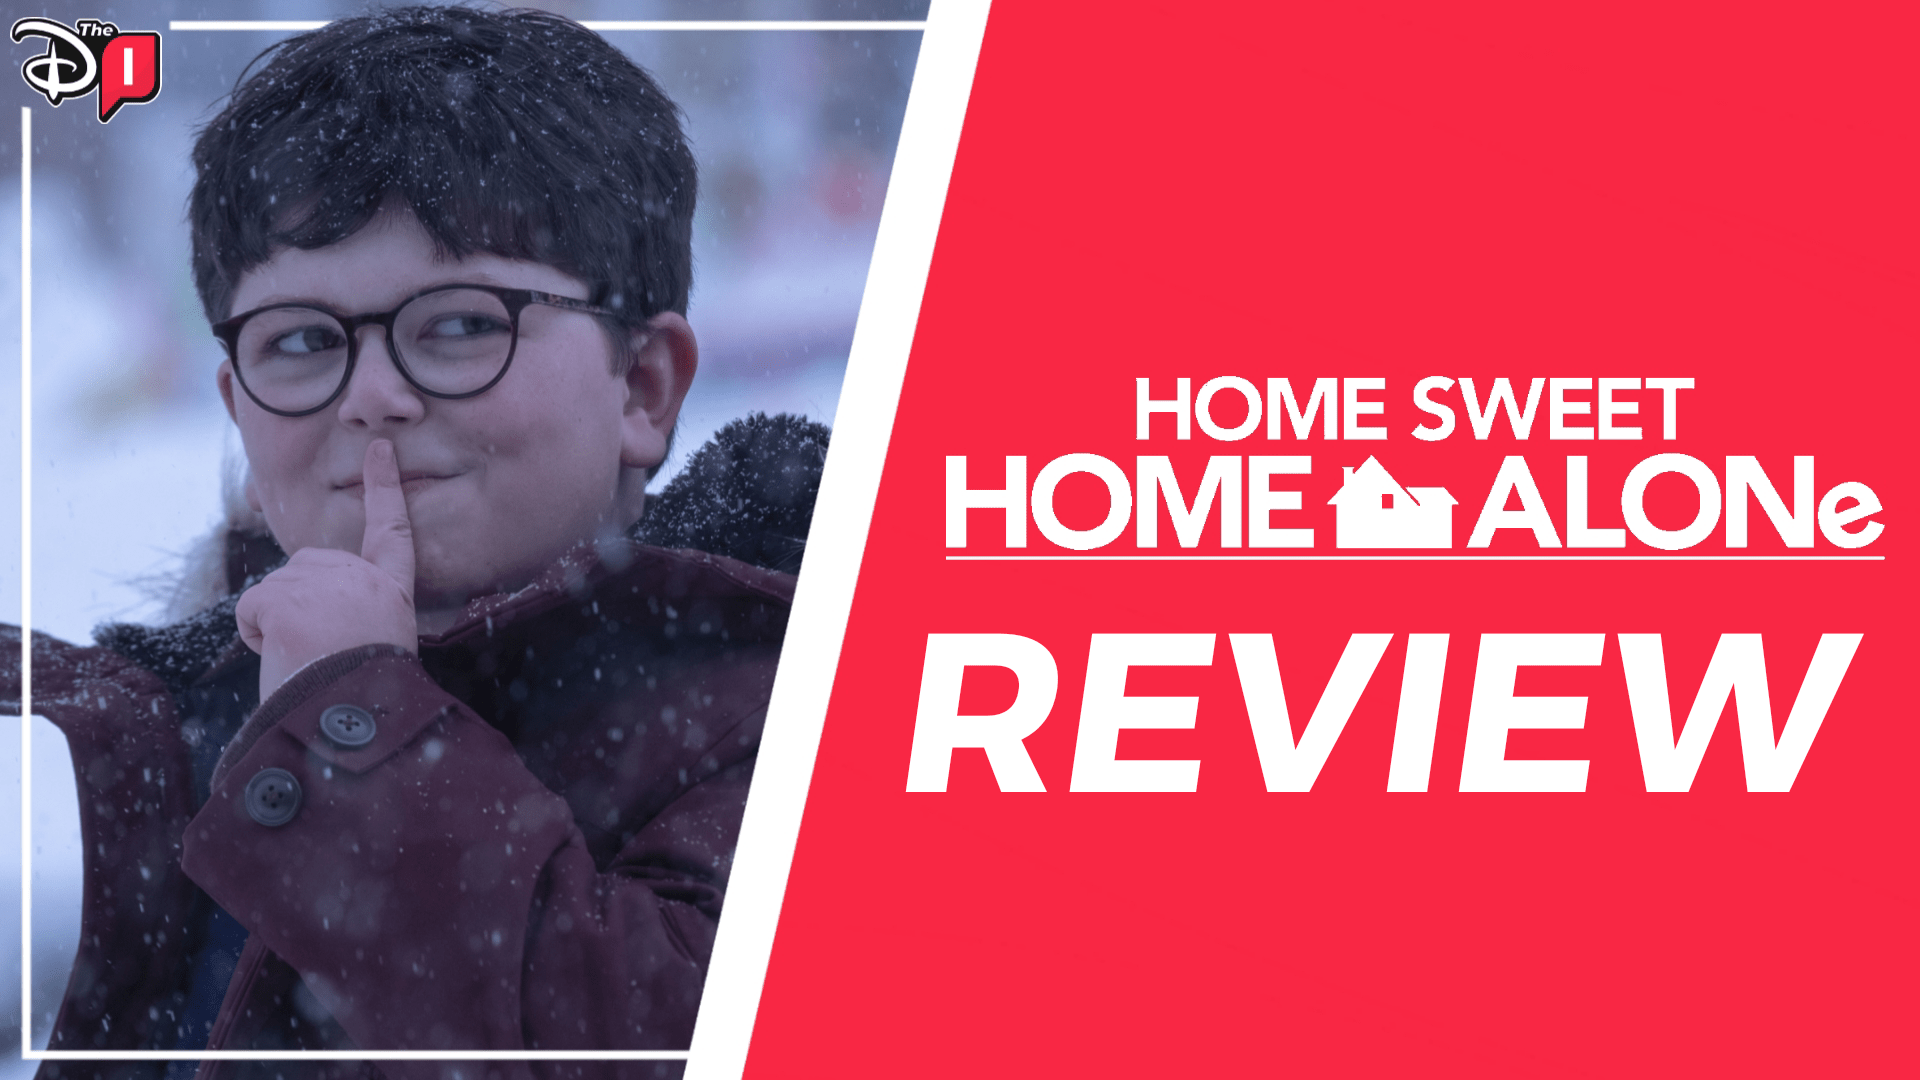 ‘Home Sweet Home Alone’ Review: Cringey, Unfunny & Mostly Forgettable